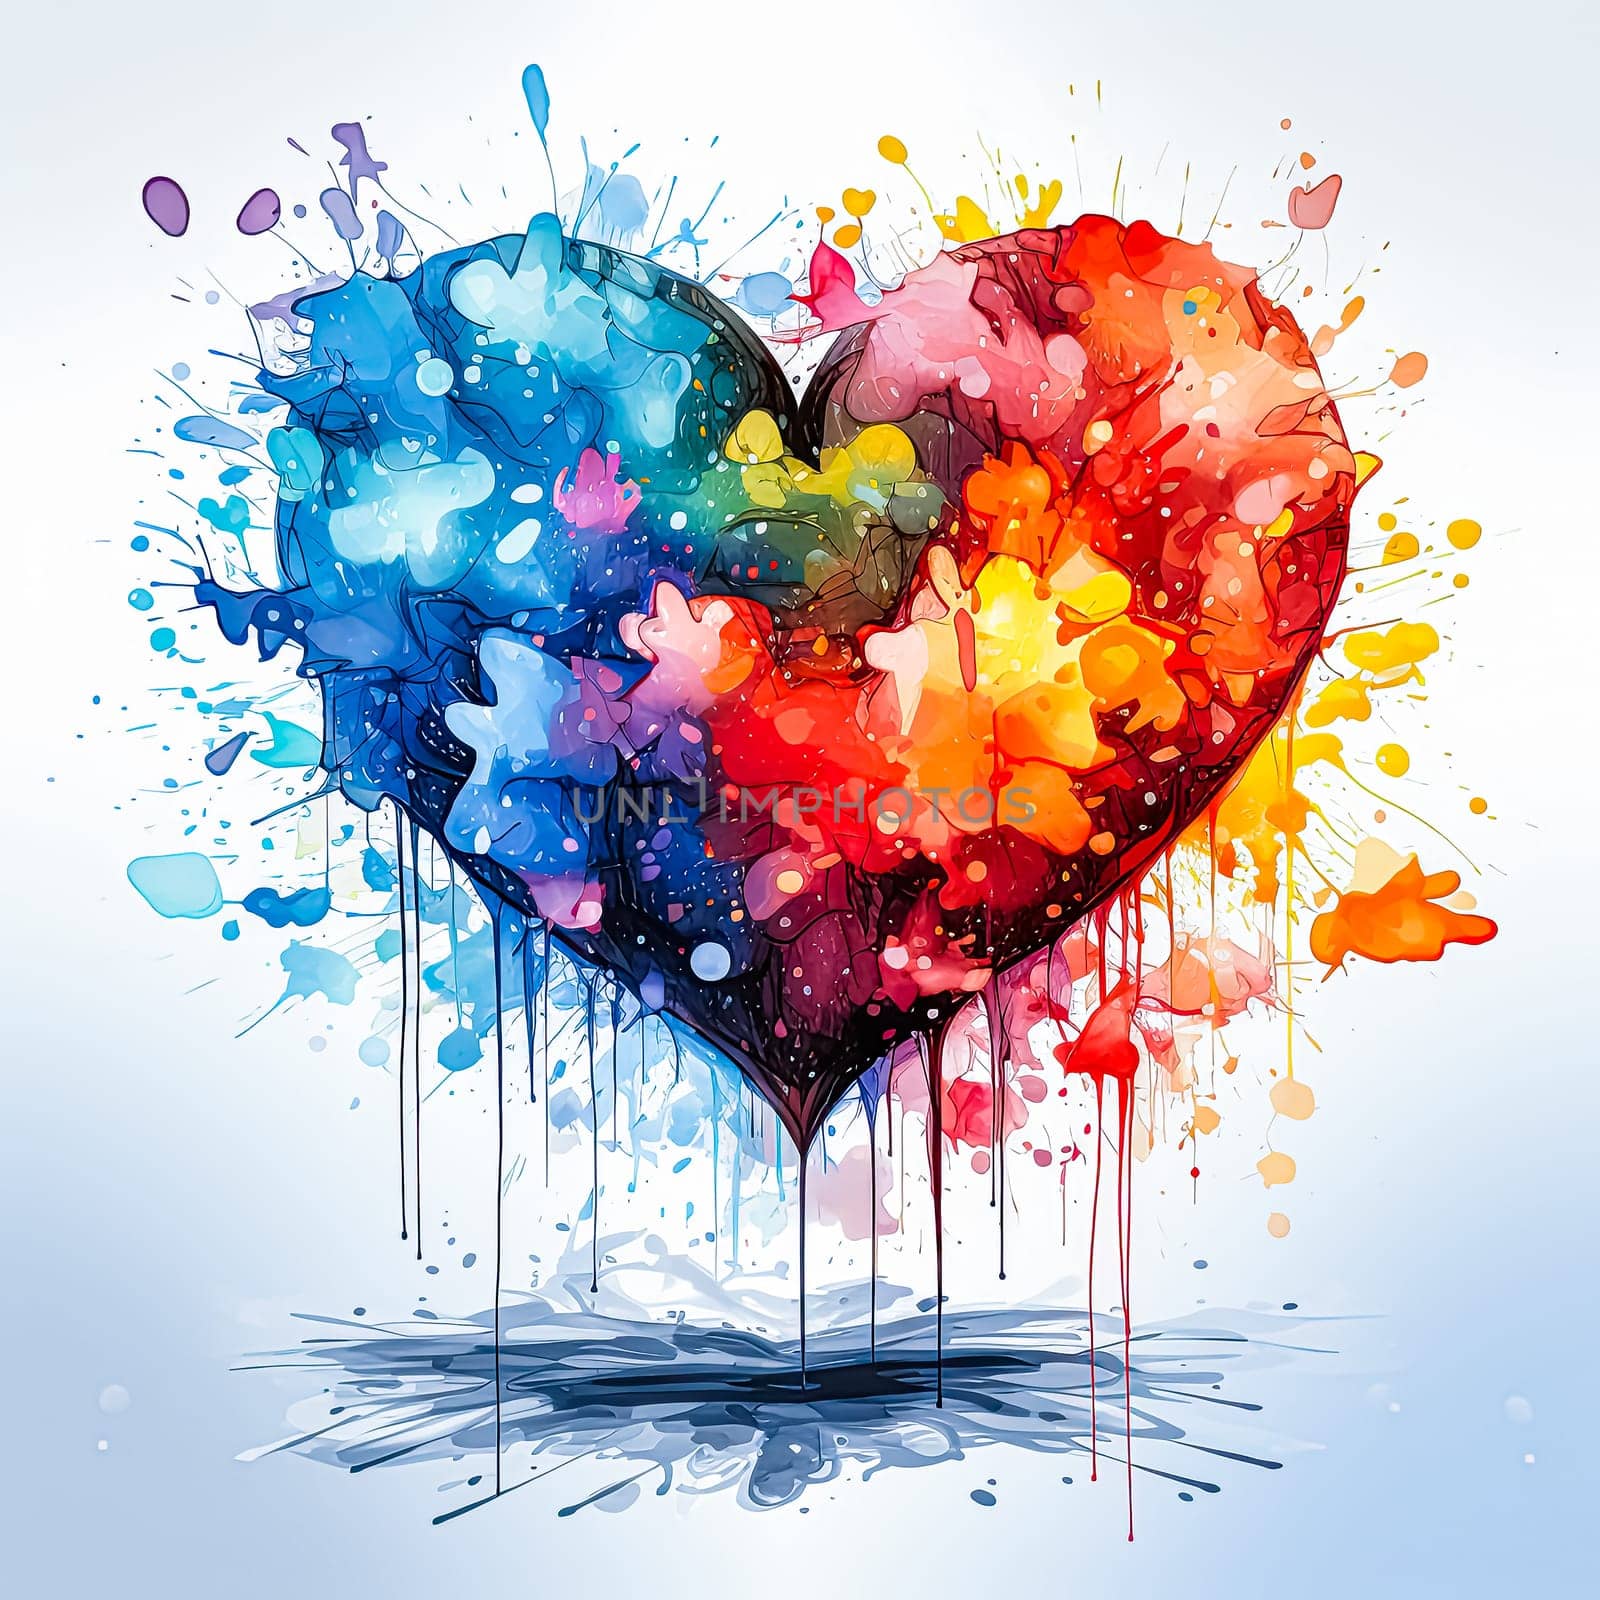 Love in Bloom, A watercolor heart image, vibrant and tender, perfect for expressing affection in Valentines Day projects